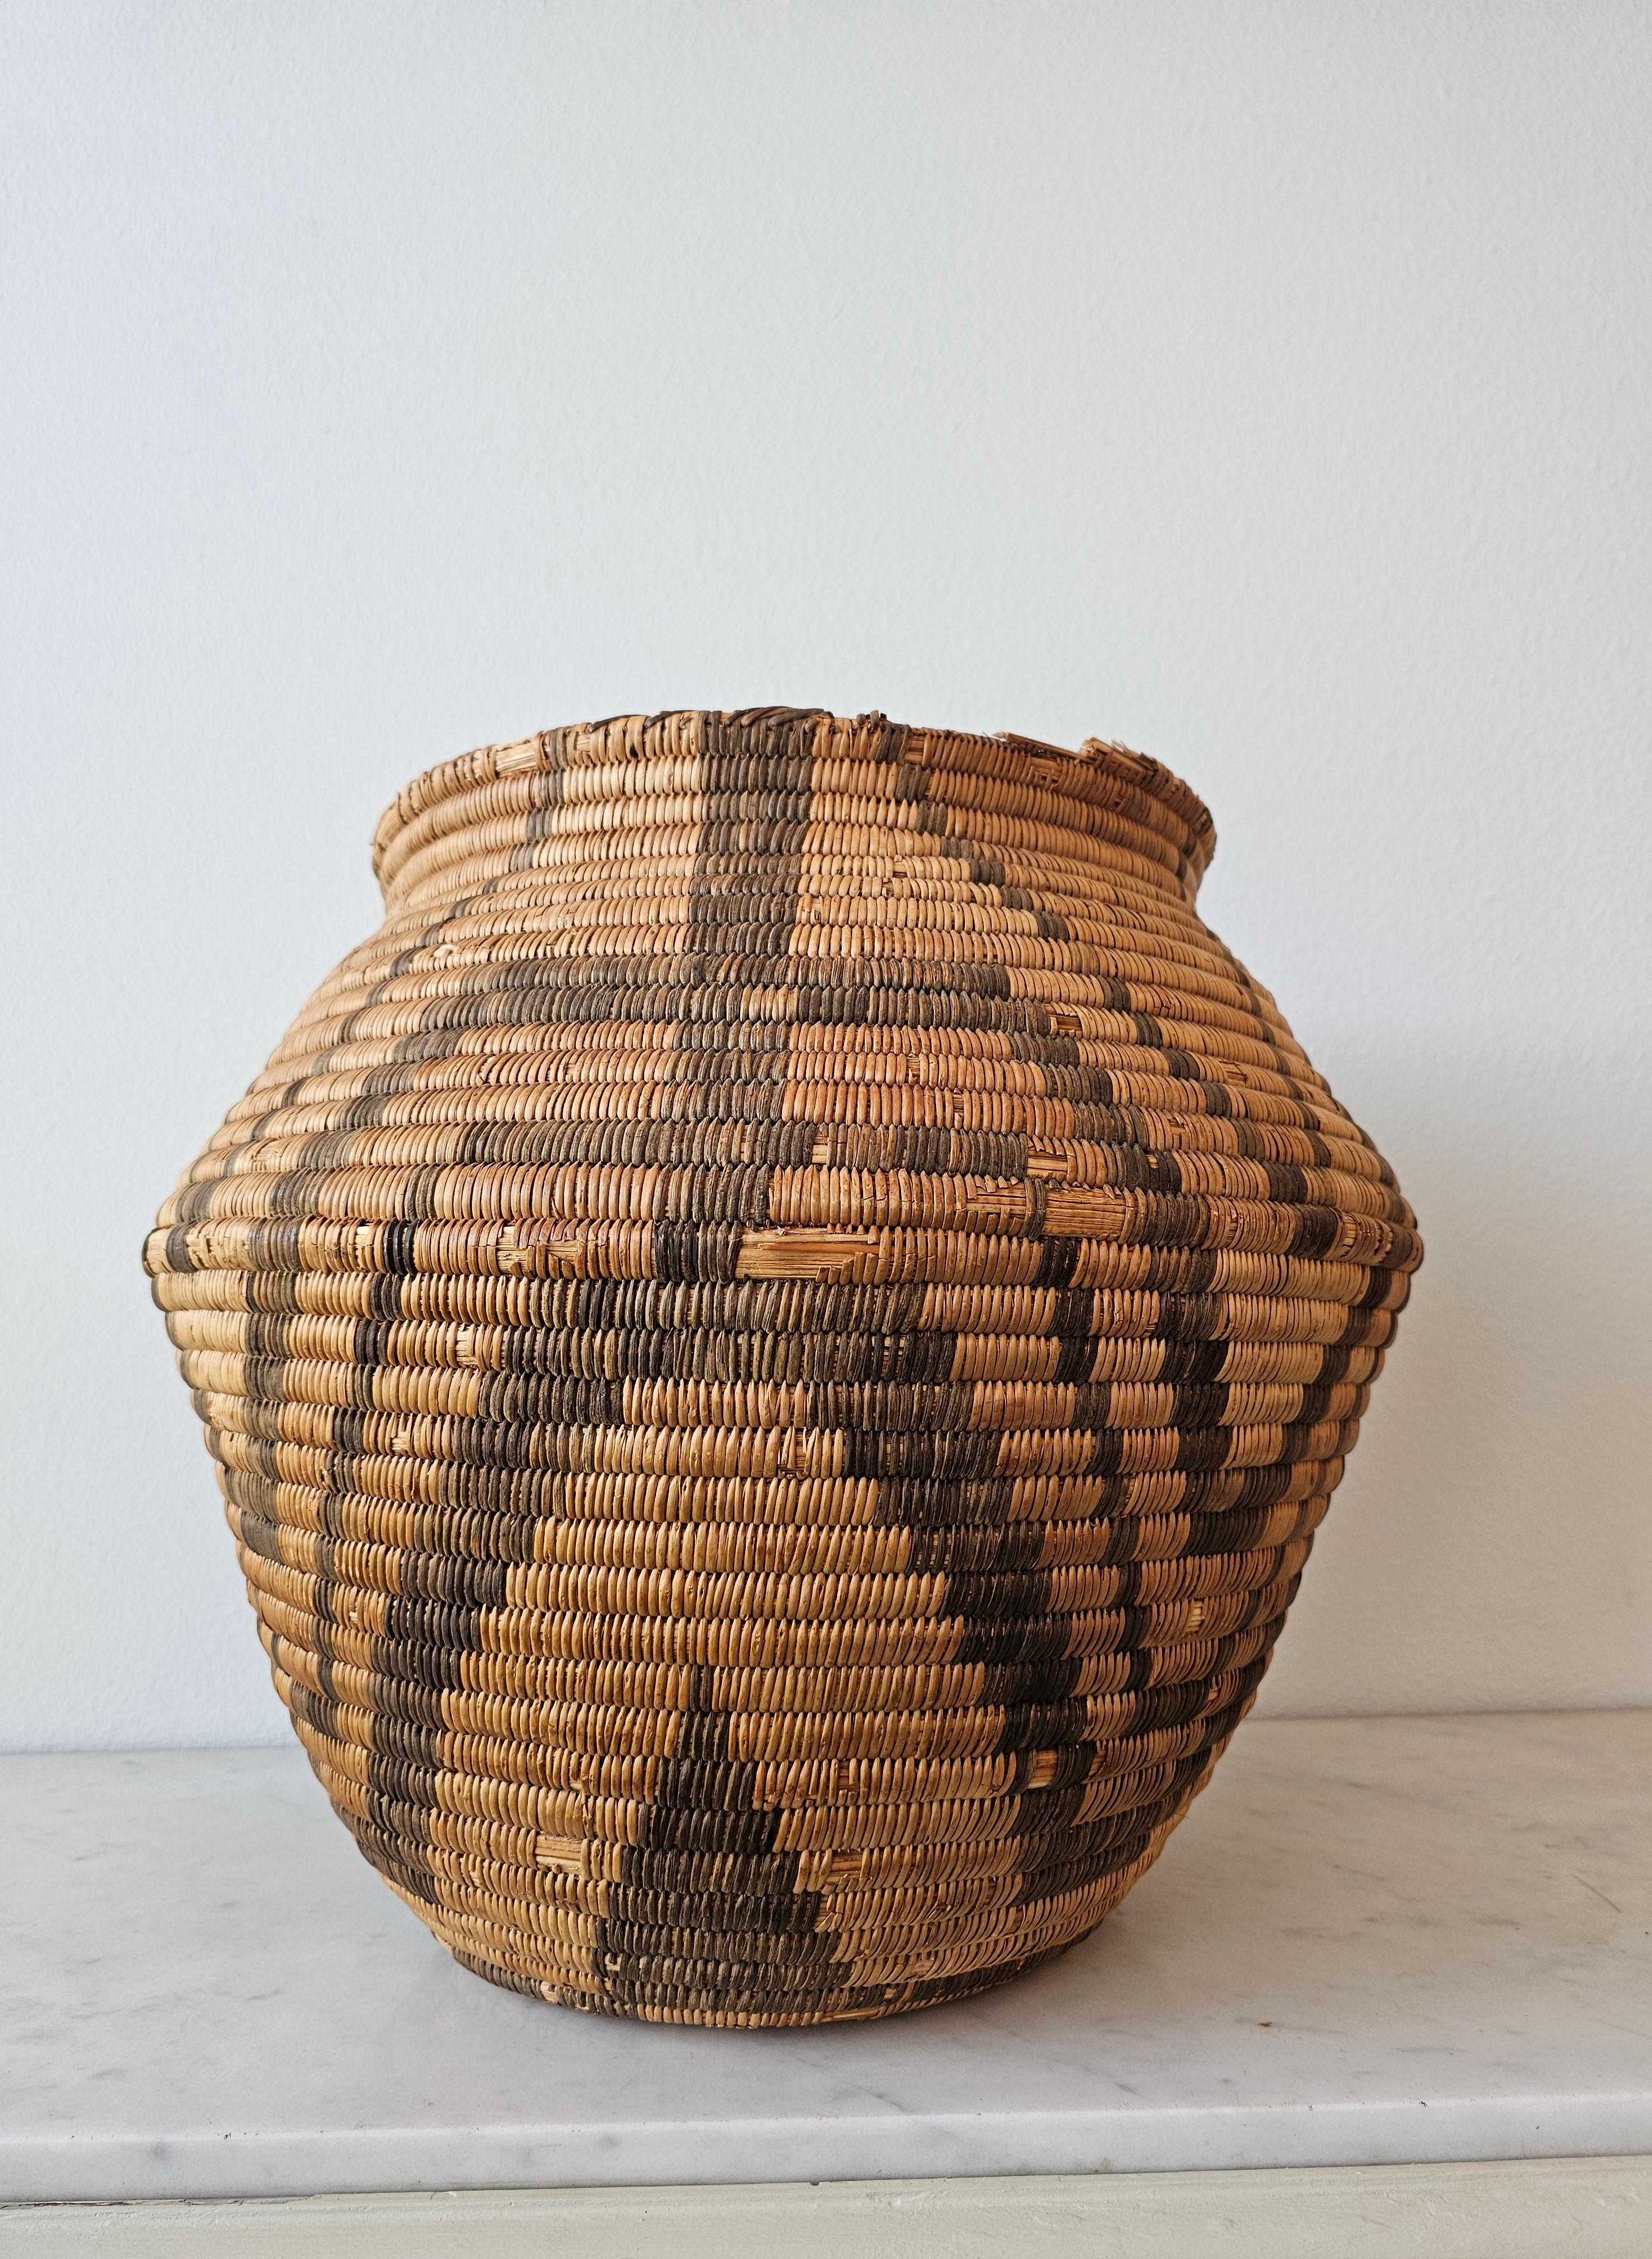 Antique Apache Olla Jar Coiled Willow Wicker Devil's Claw Basket  In Fair Condition For Sale In Forney, TX